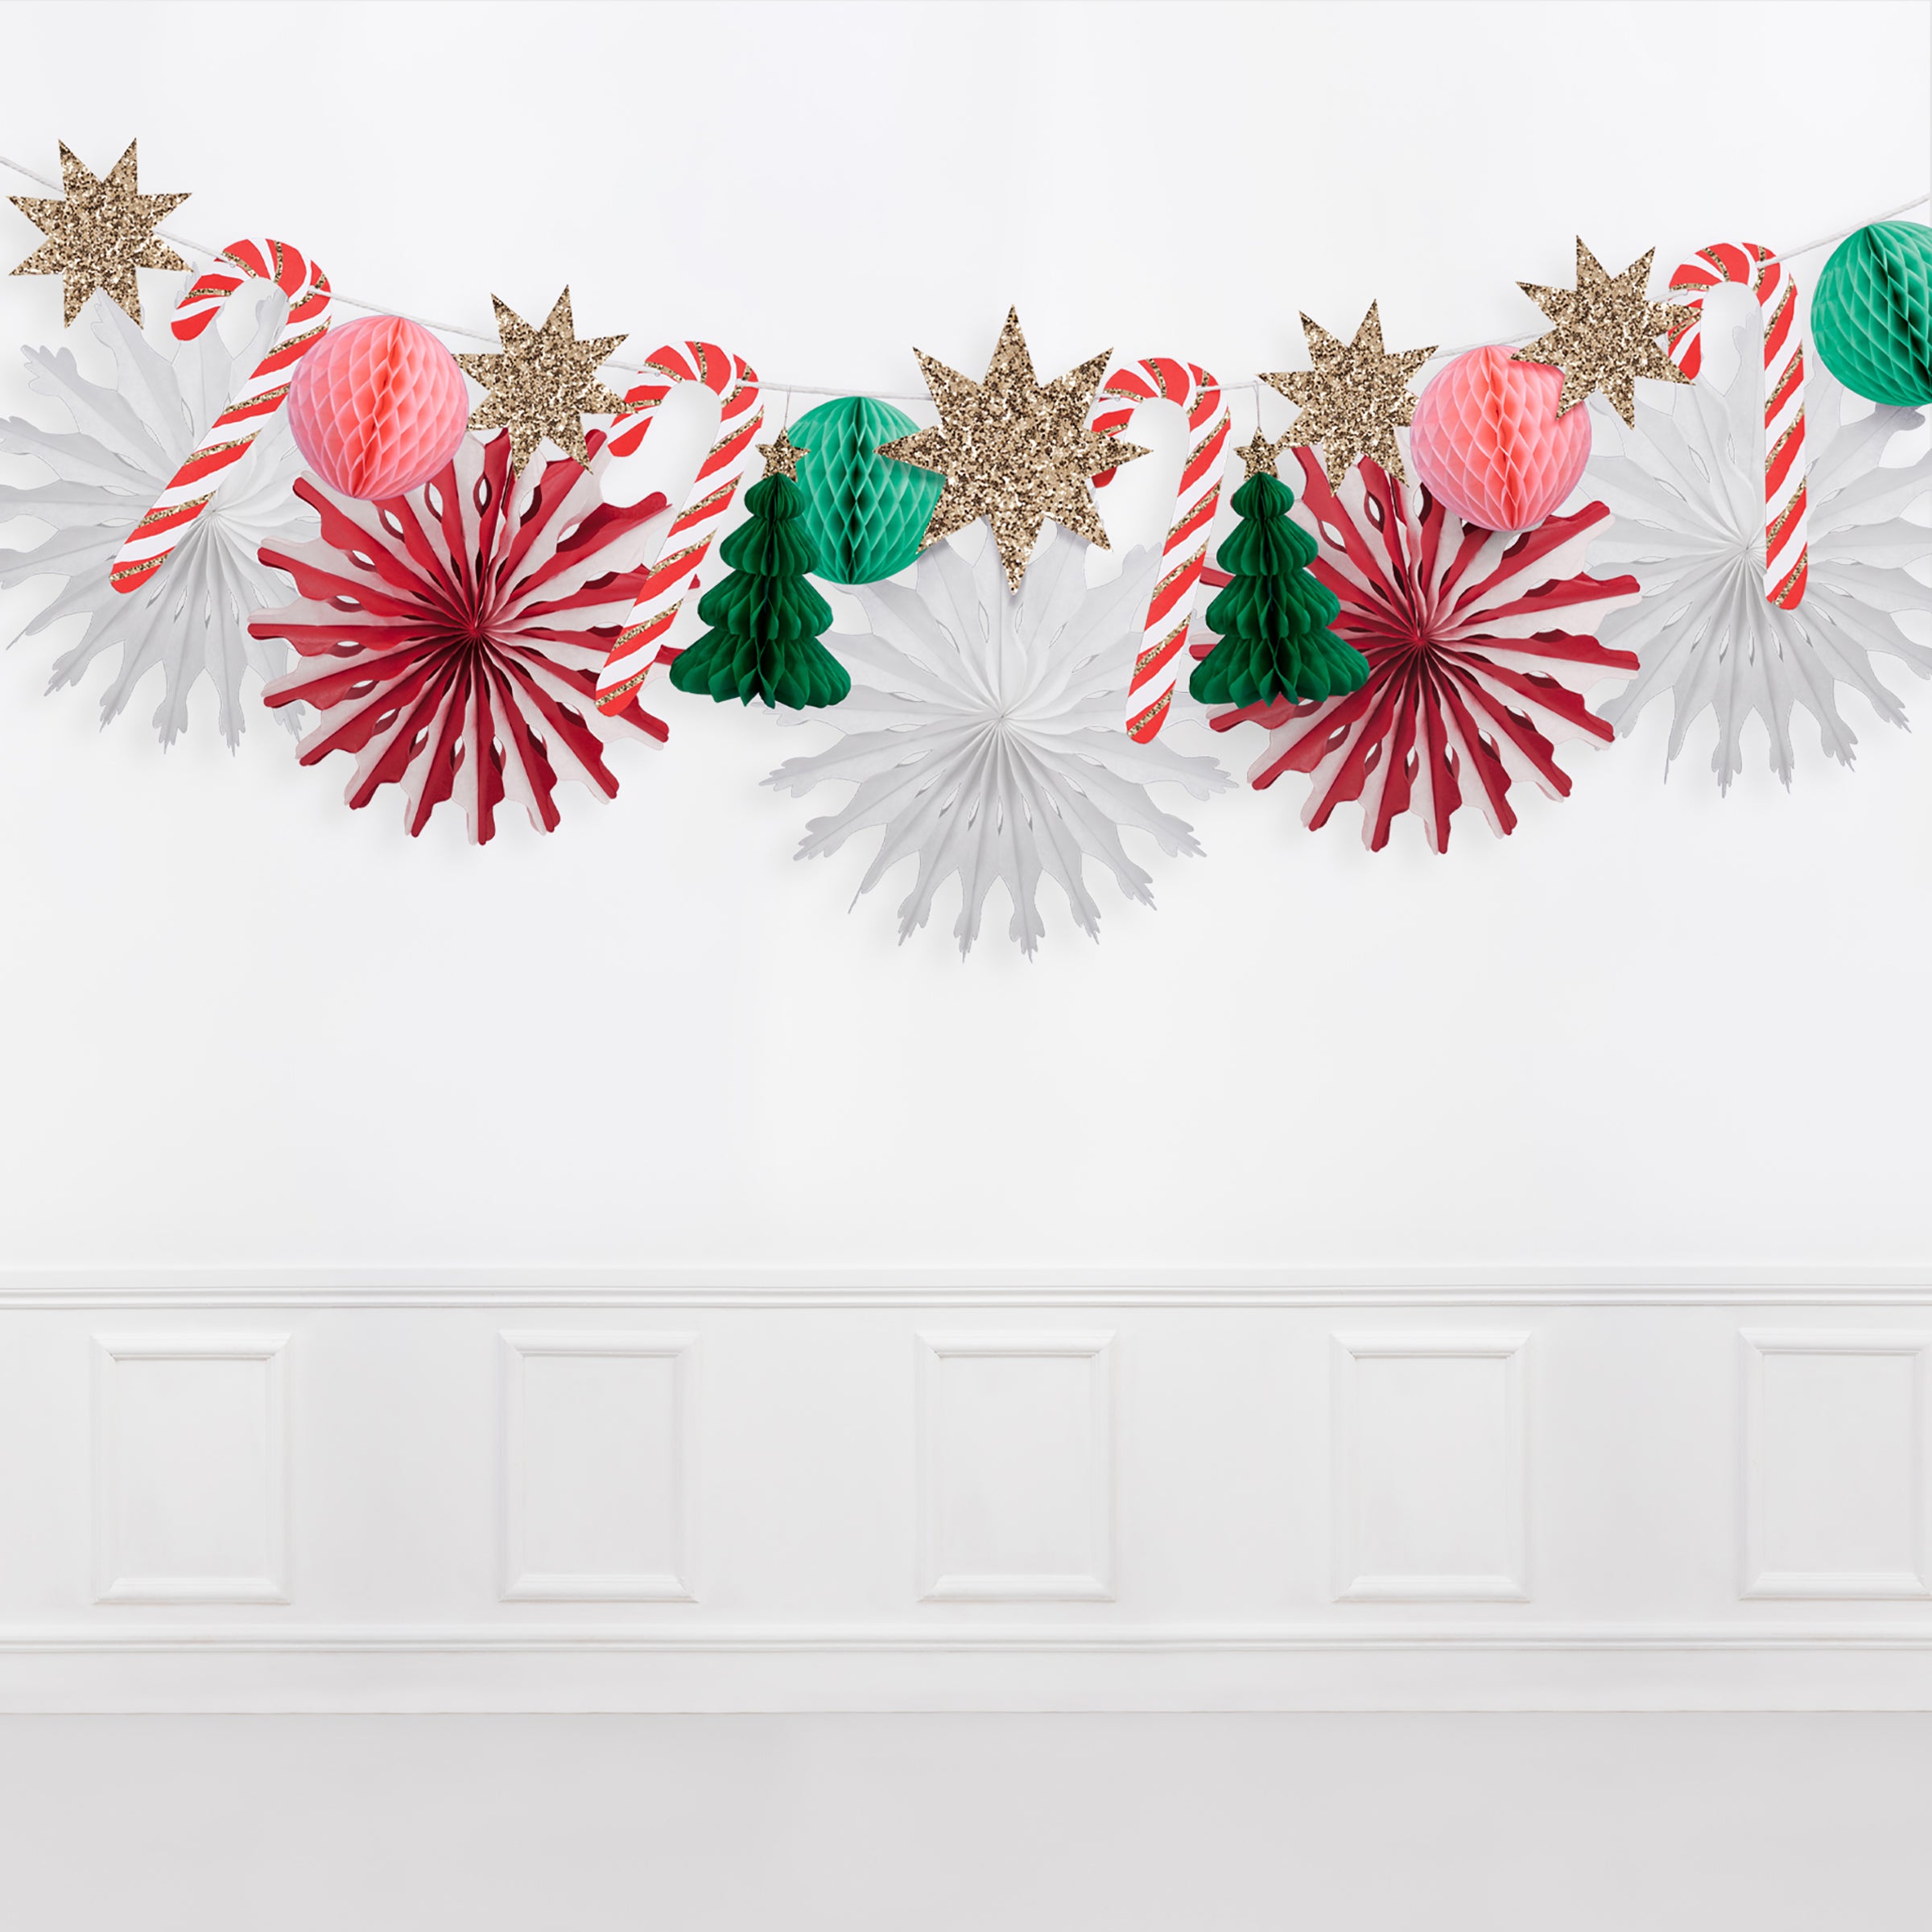 Our Christmas paper garland has 3D honeycomb decorations, stars and Christmas trees.